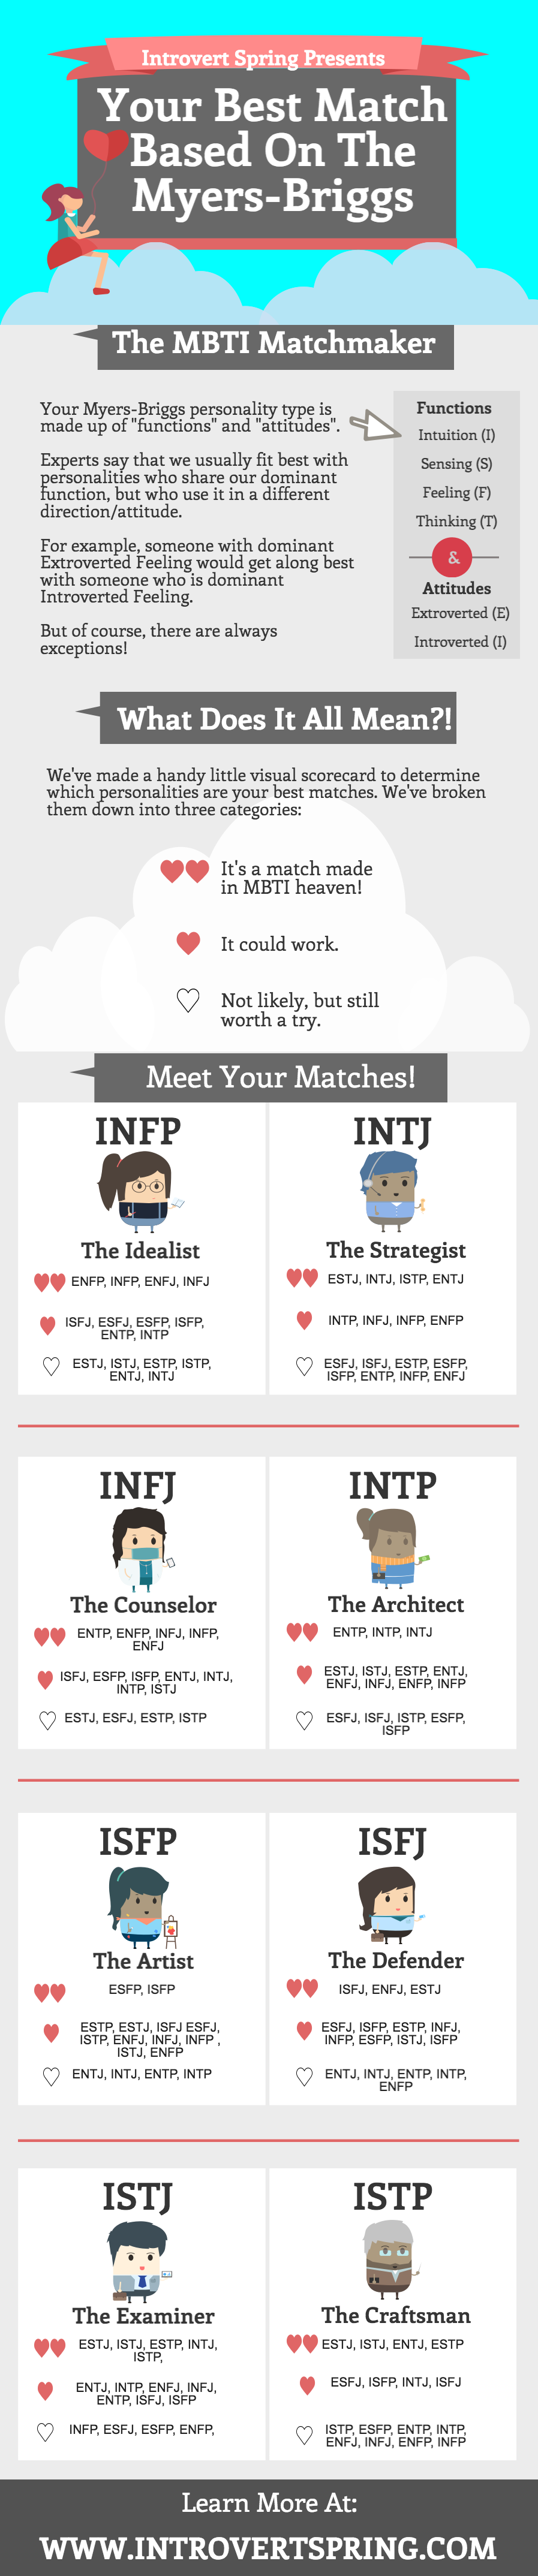 infp dating isfp)